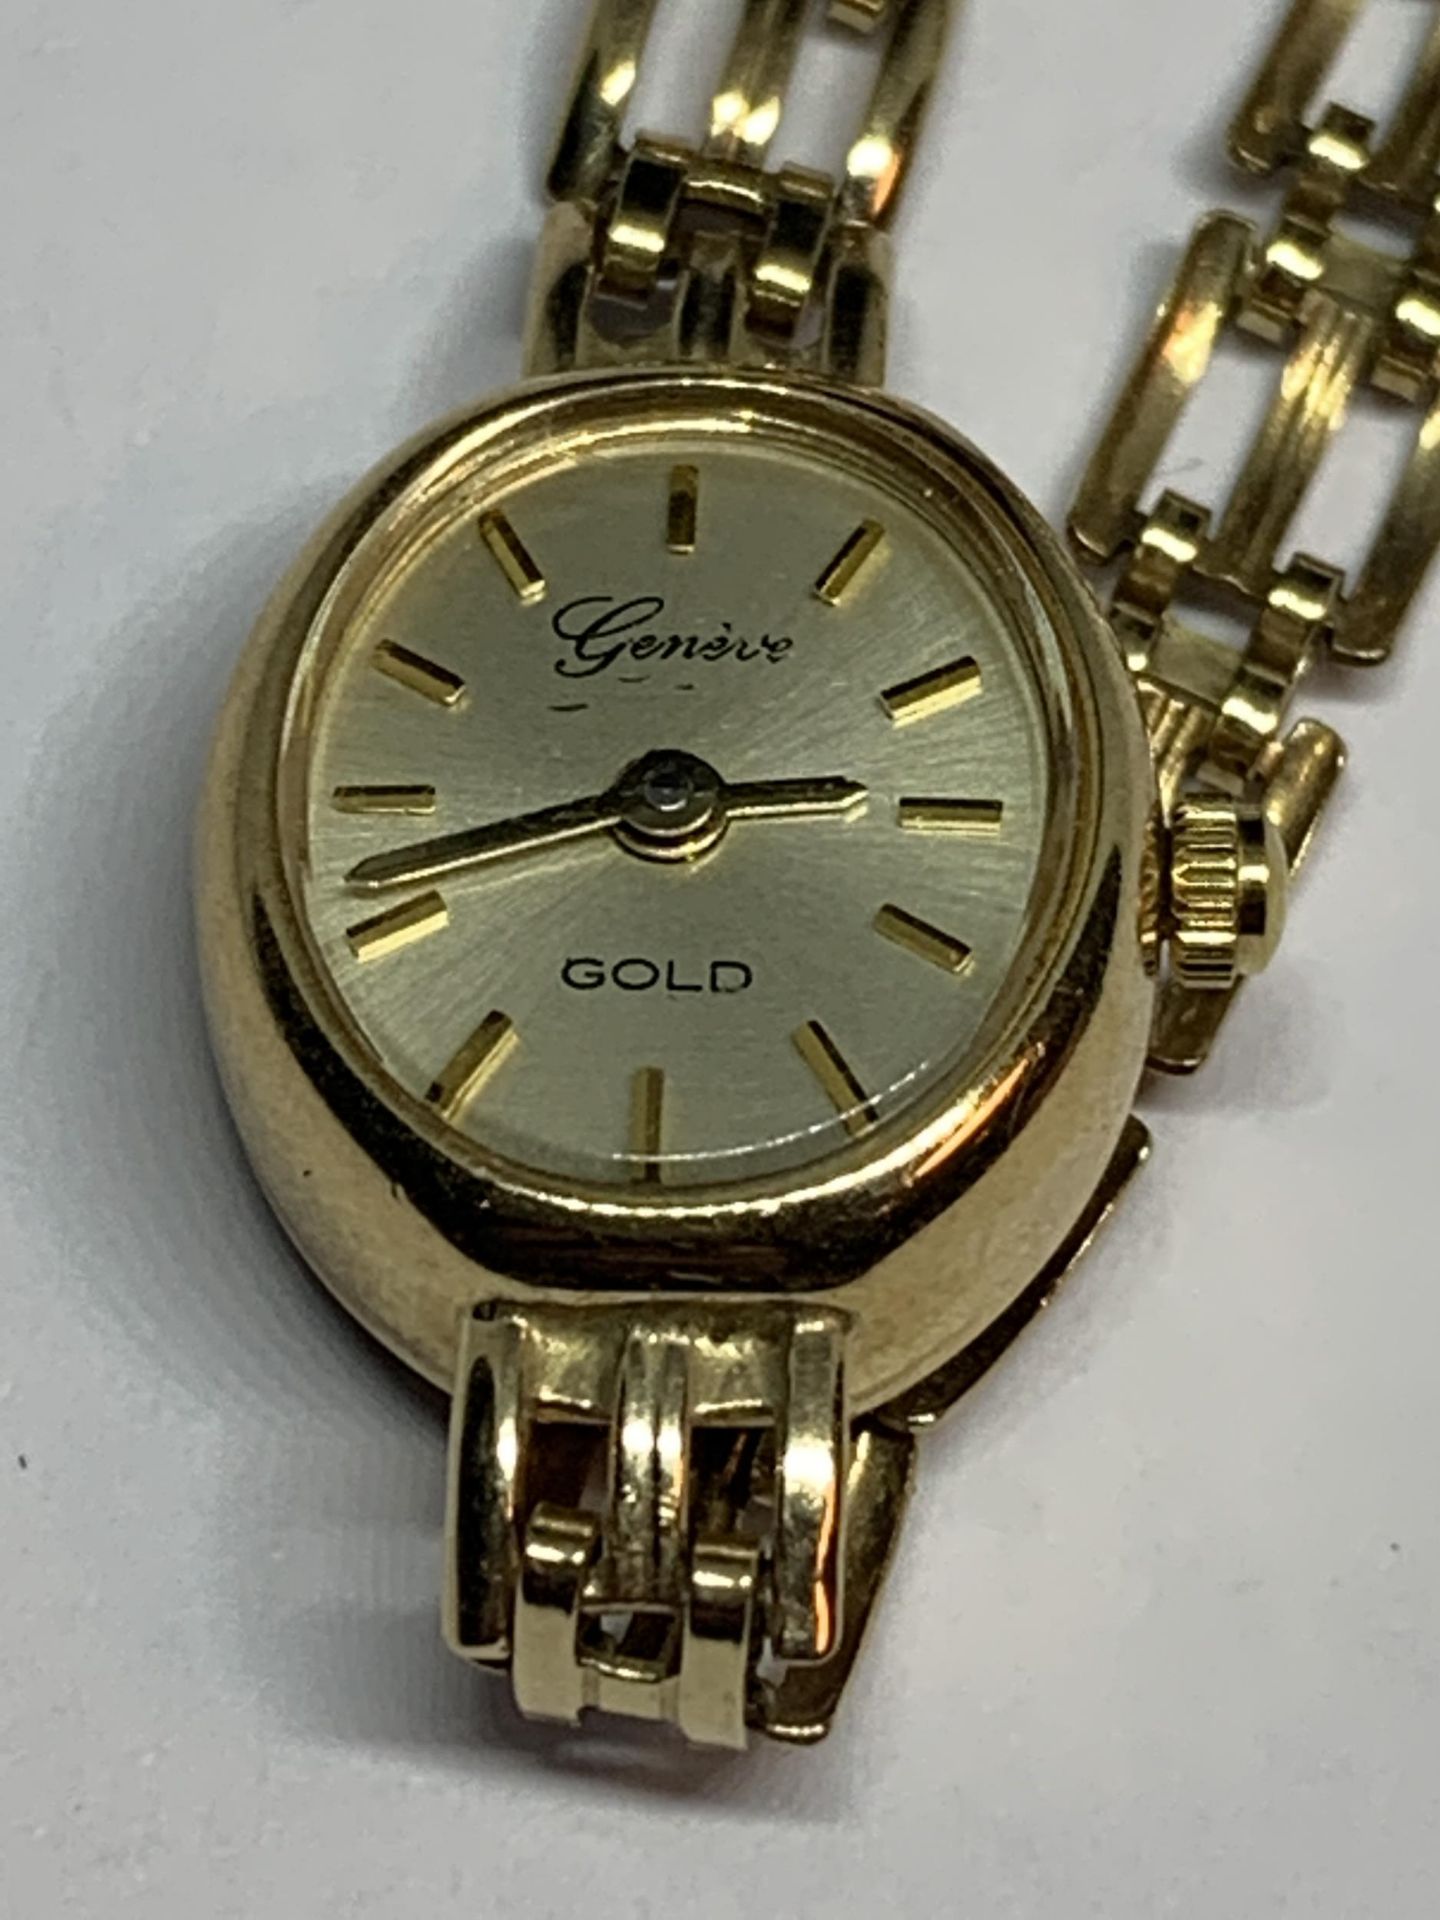 A GENEVE WRIST WATCH WITH 9 CARAT GOLD CASE AND STRAP GROSS WEIGHT 9 GRAMS - Image 2 of 3